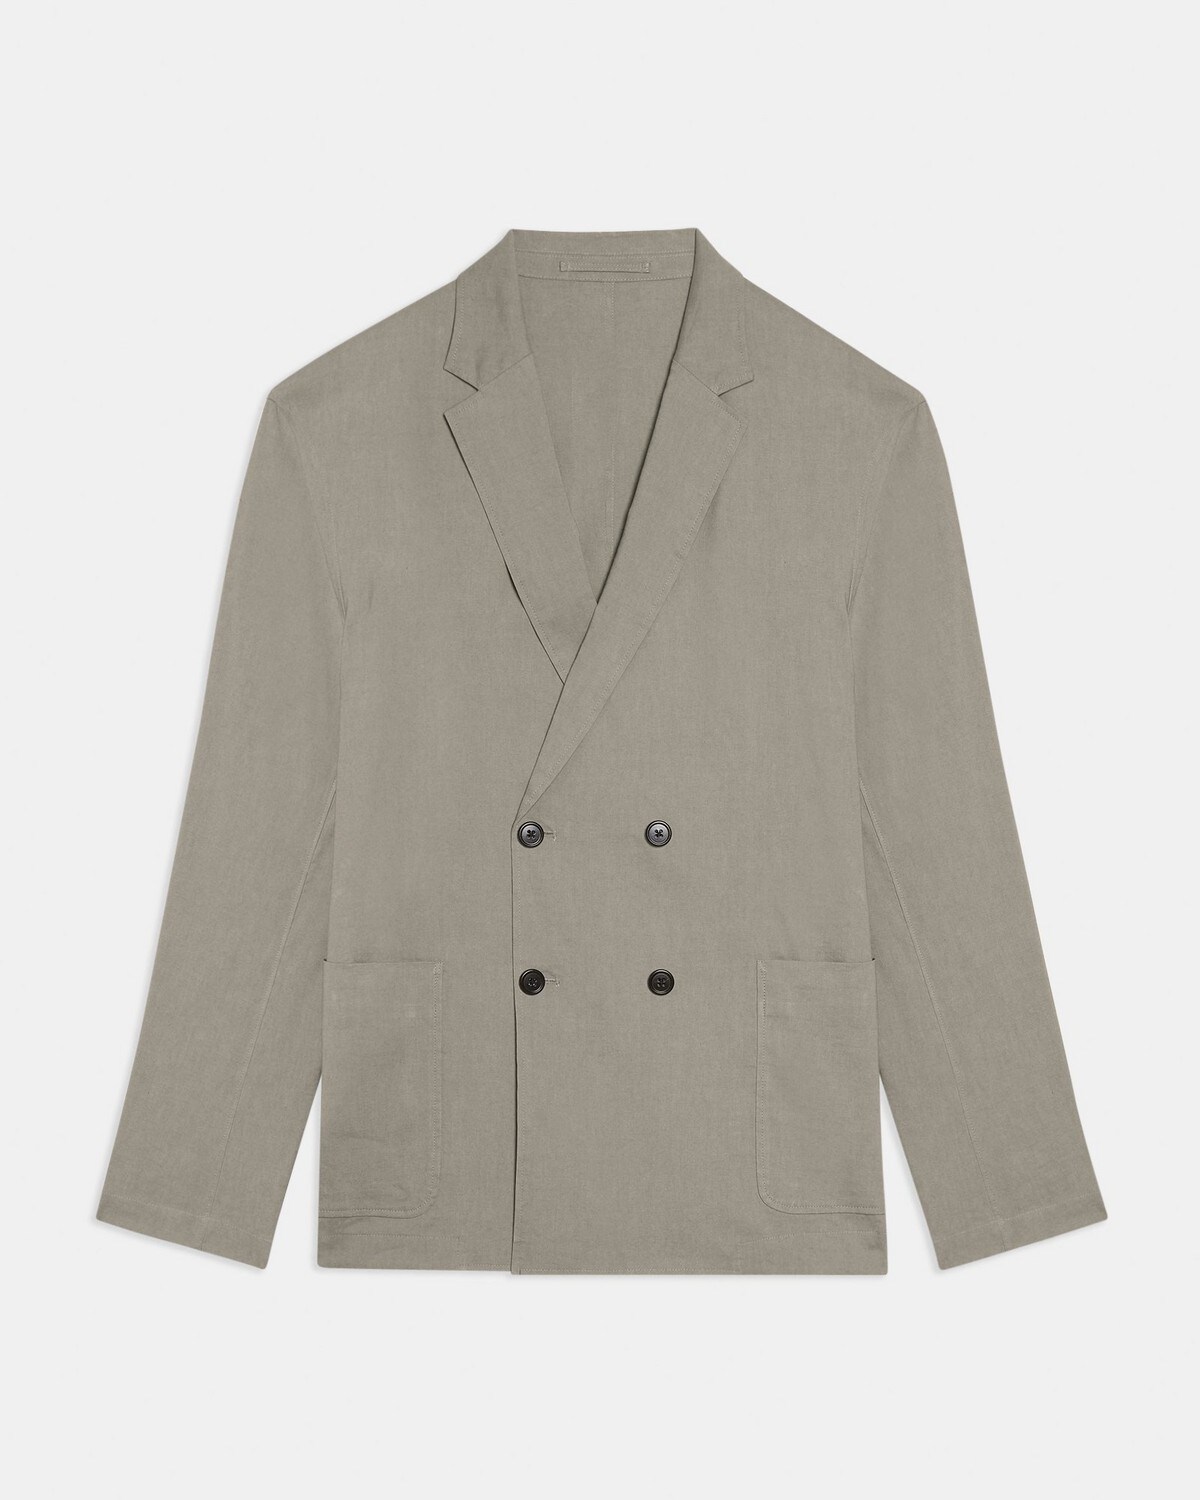 Clinton Double-Breasted Blazer in Good Linen